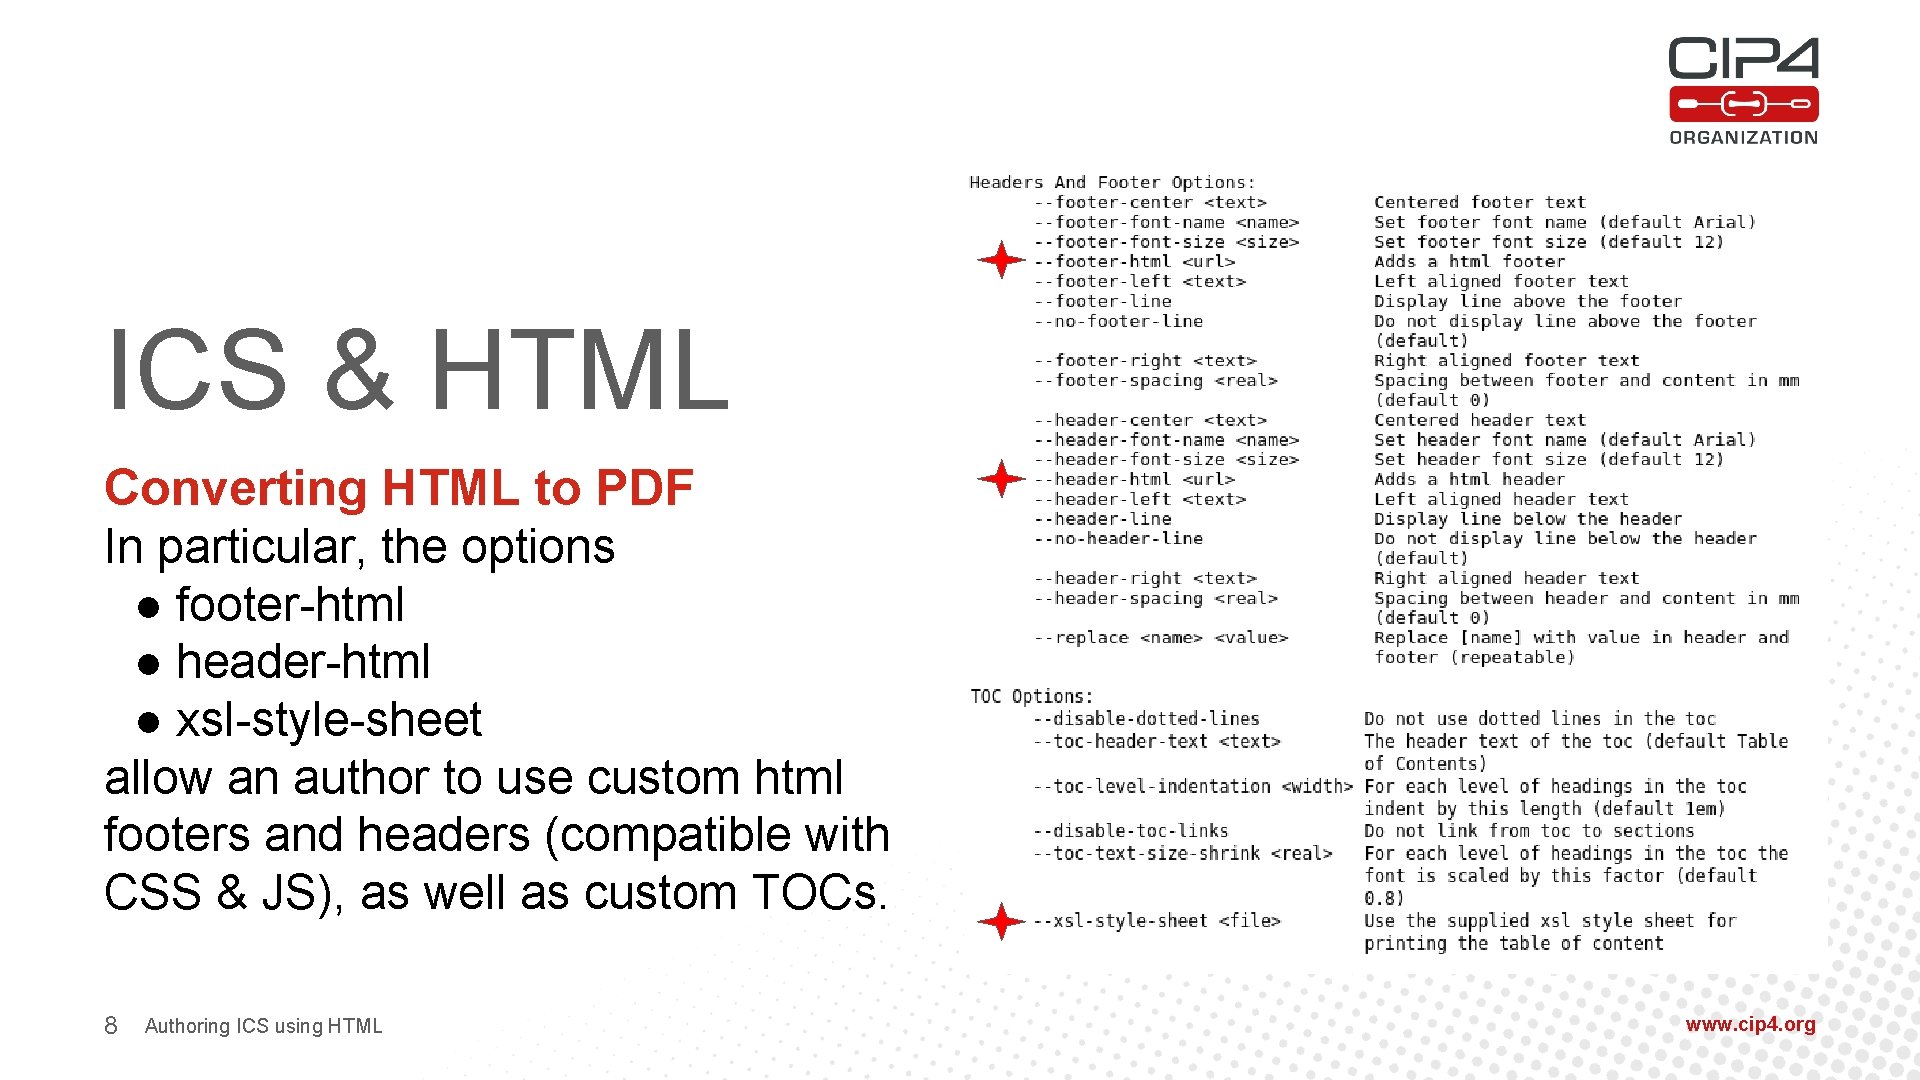 ICS & HTML Converting HTML to PDF In particular, the options ● footer-html ●